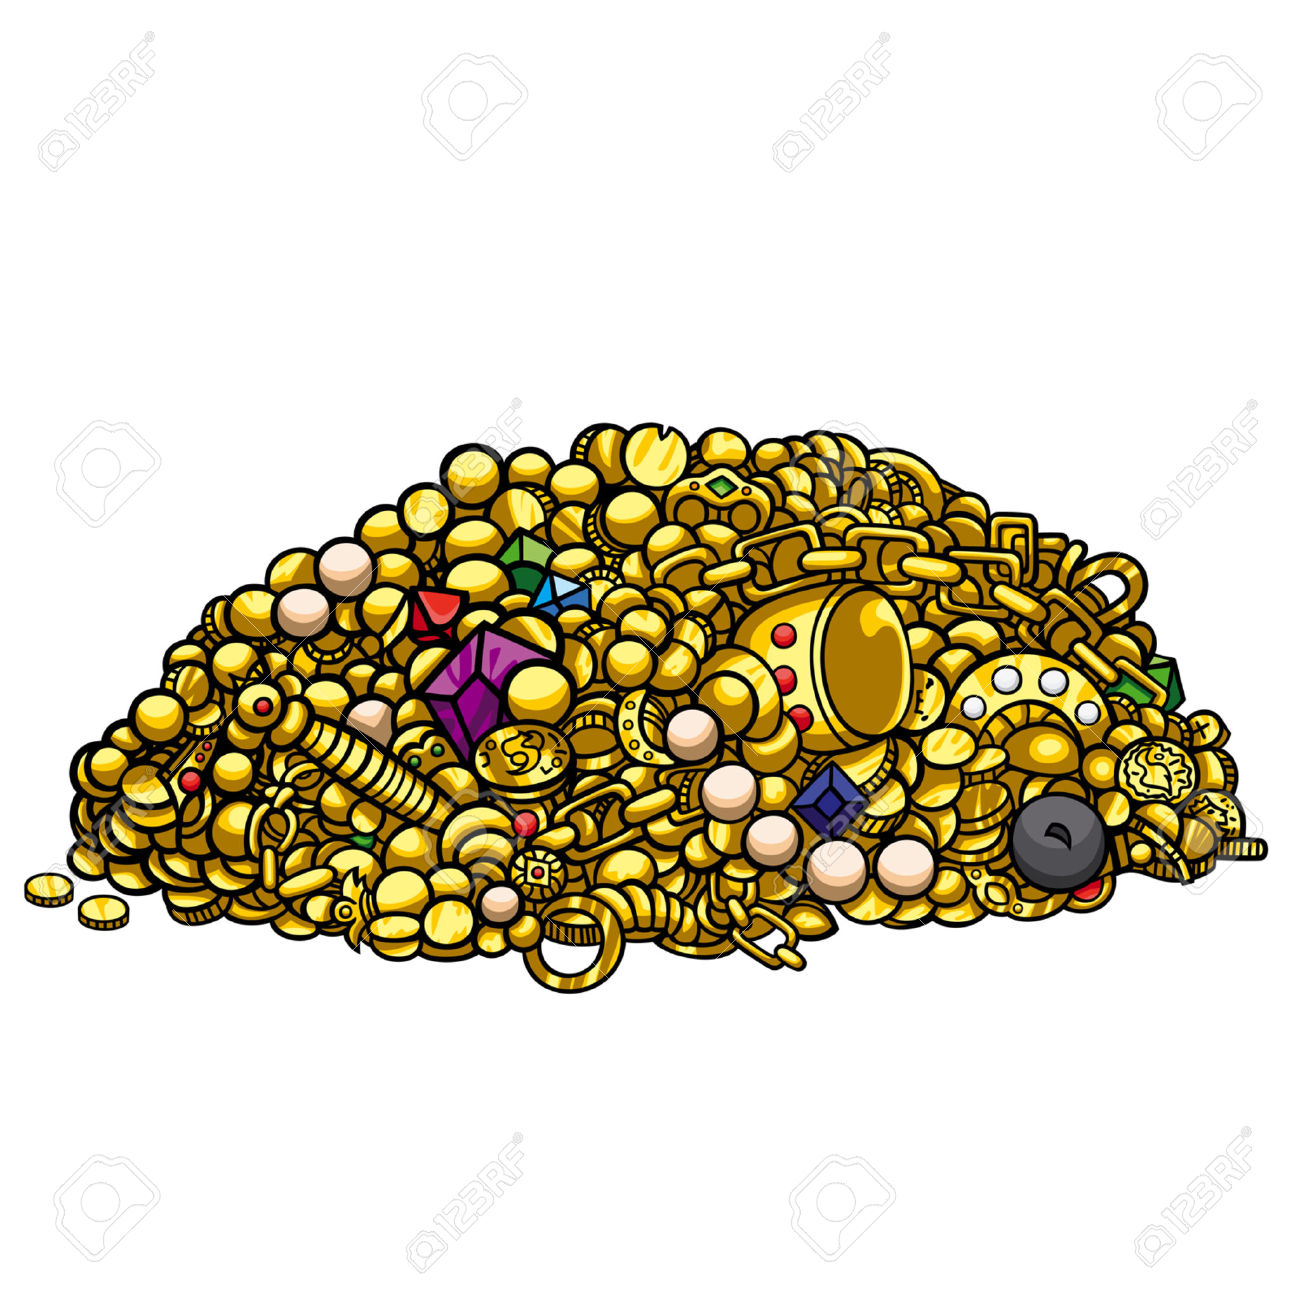 Jewels free download best. Jewelry clipart pile